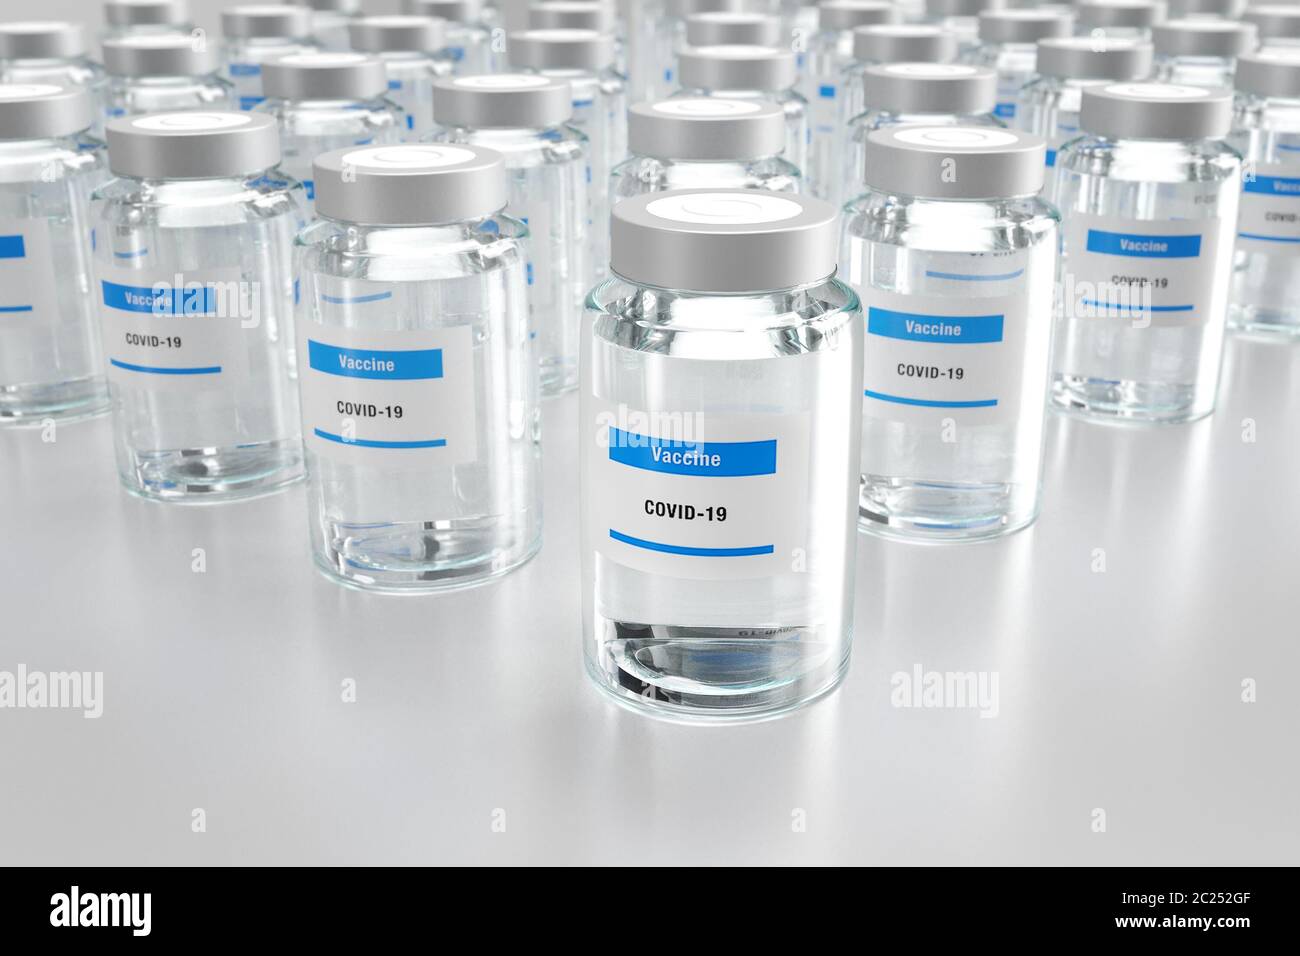 3d Illustration with rows of glass vials containing Covid-19 vaccine Stock Photo